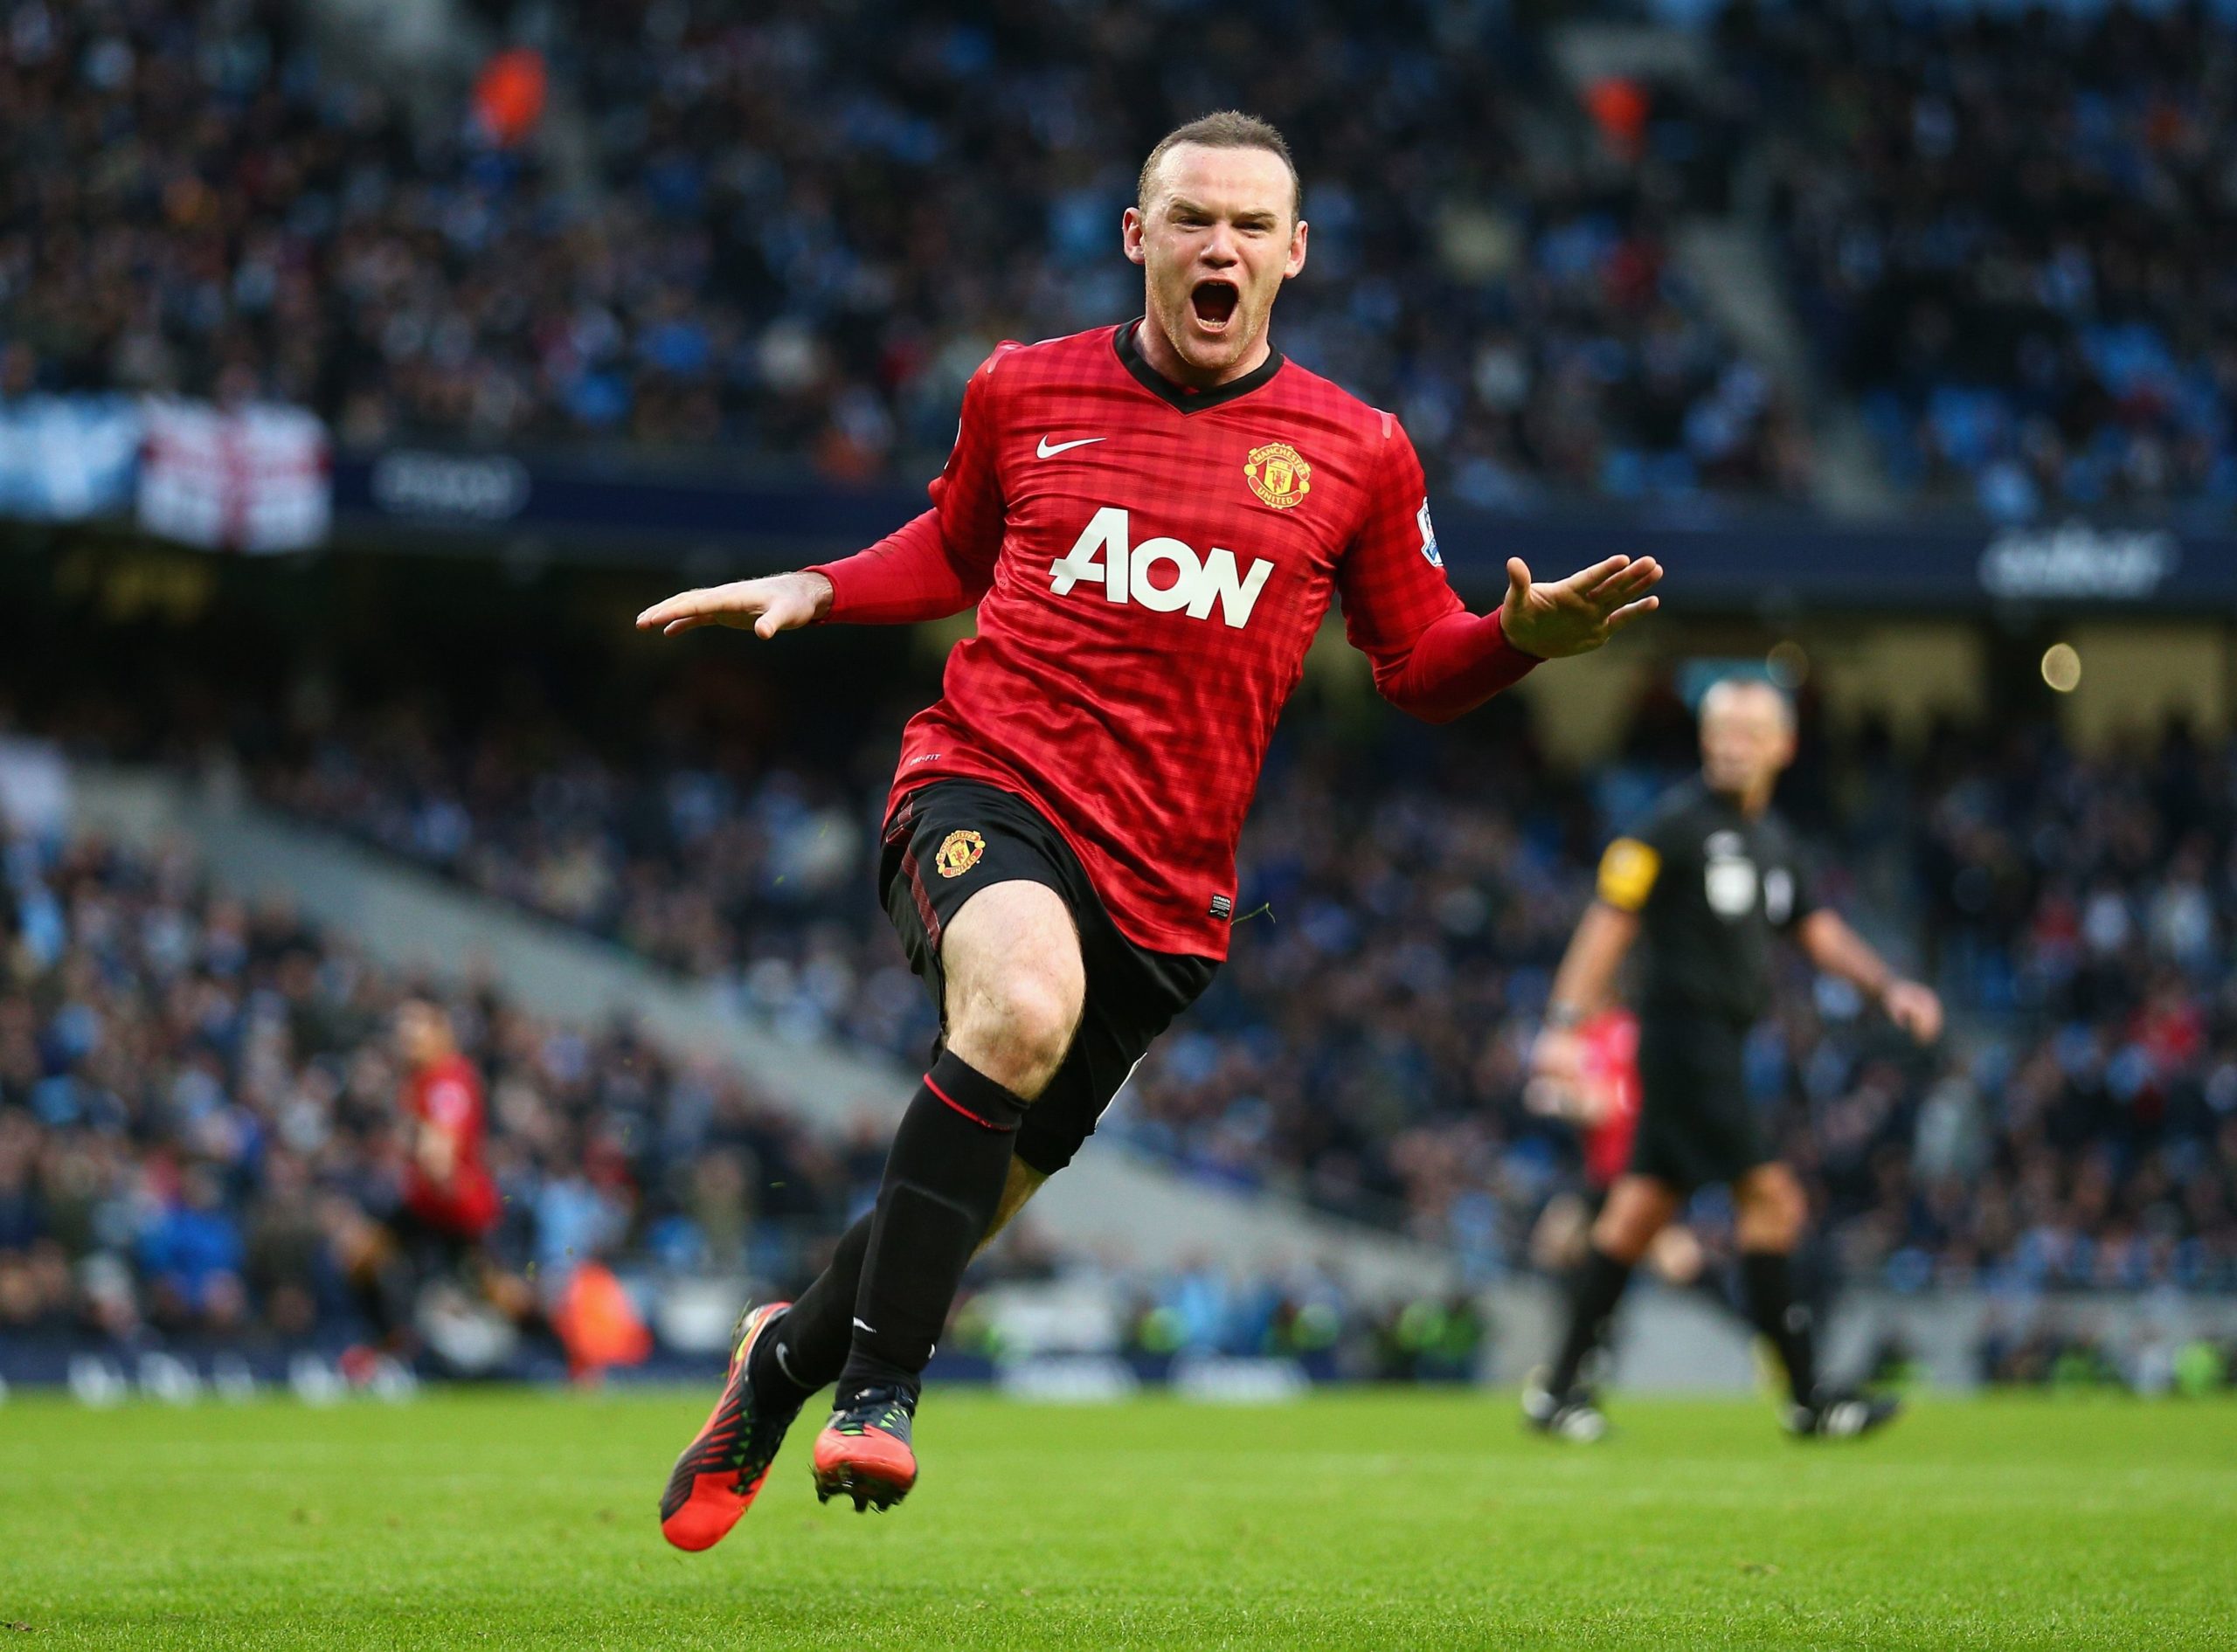 Former United Legend, Wayne Rooney to Celebrate if he Scores Against